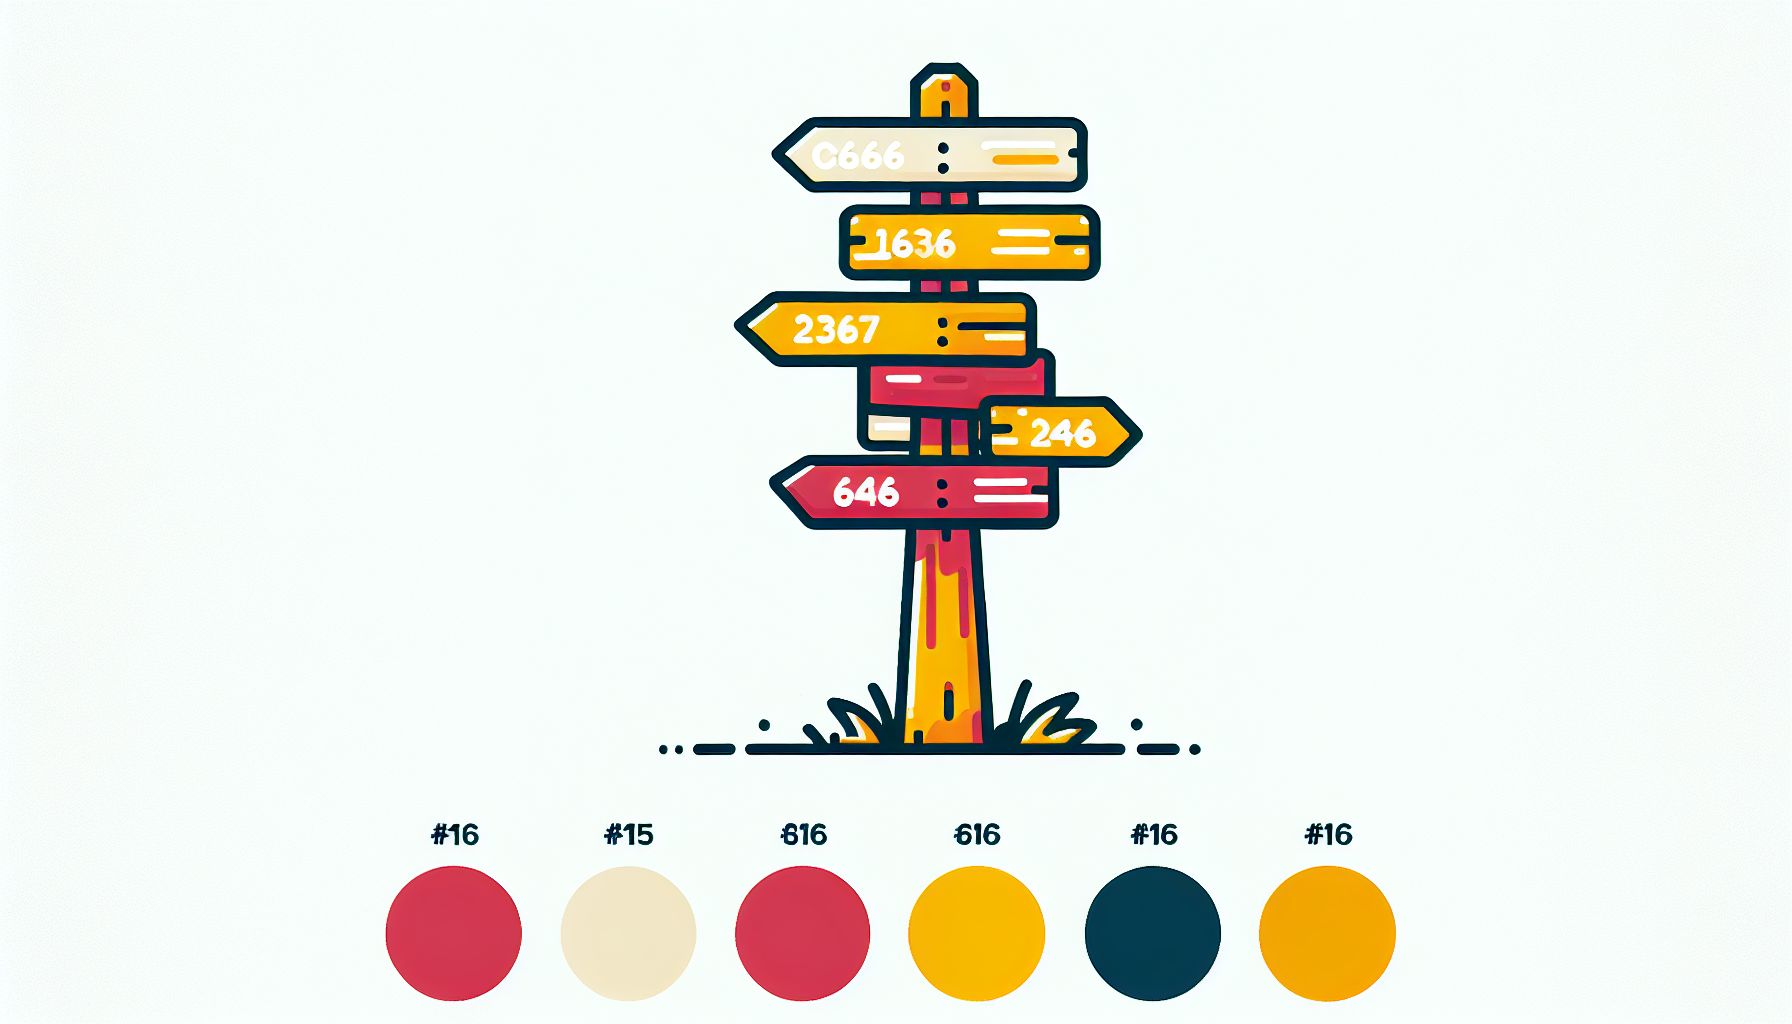 Signpost in flat illustration style and white background, red #f47574, green #88c7a8, yellow #fcc44b, and blue #645bc8 colors.